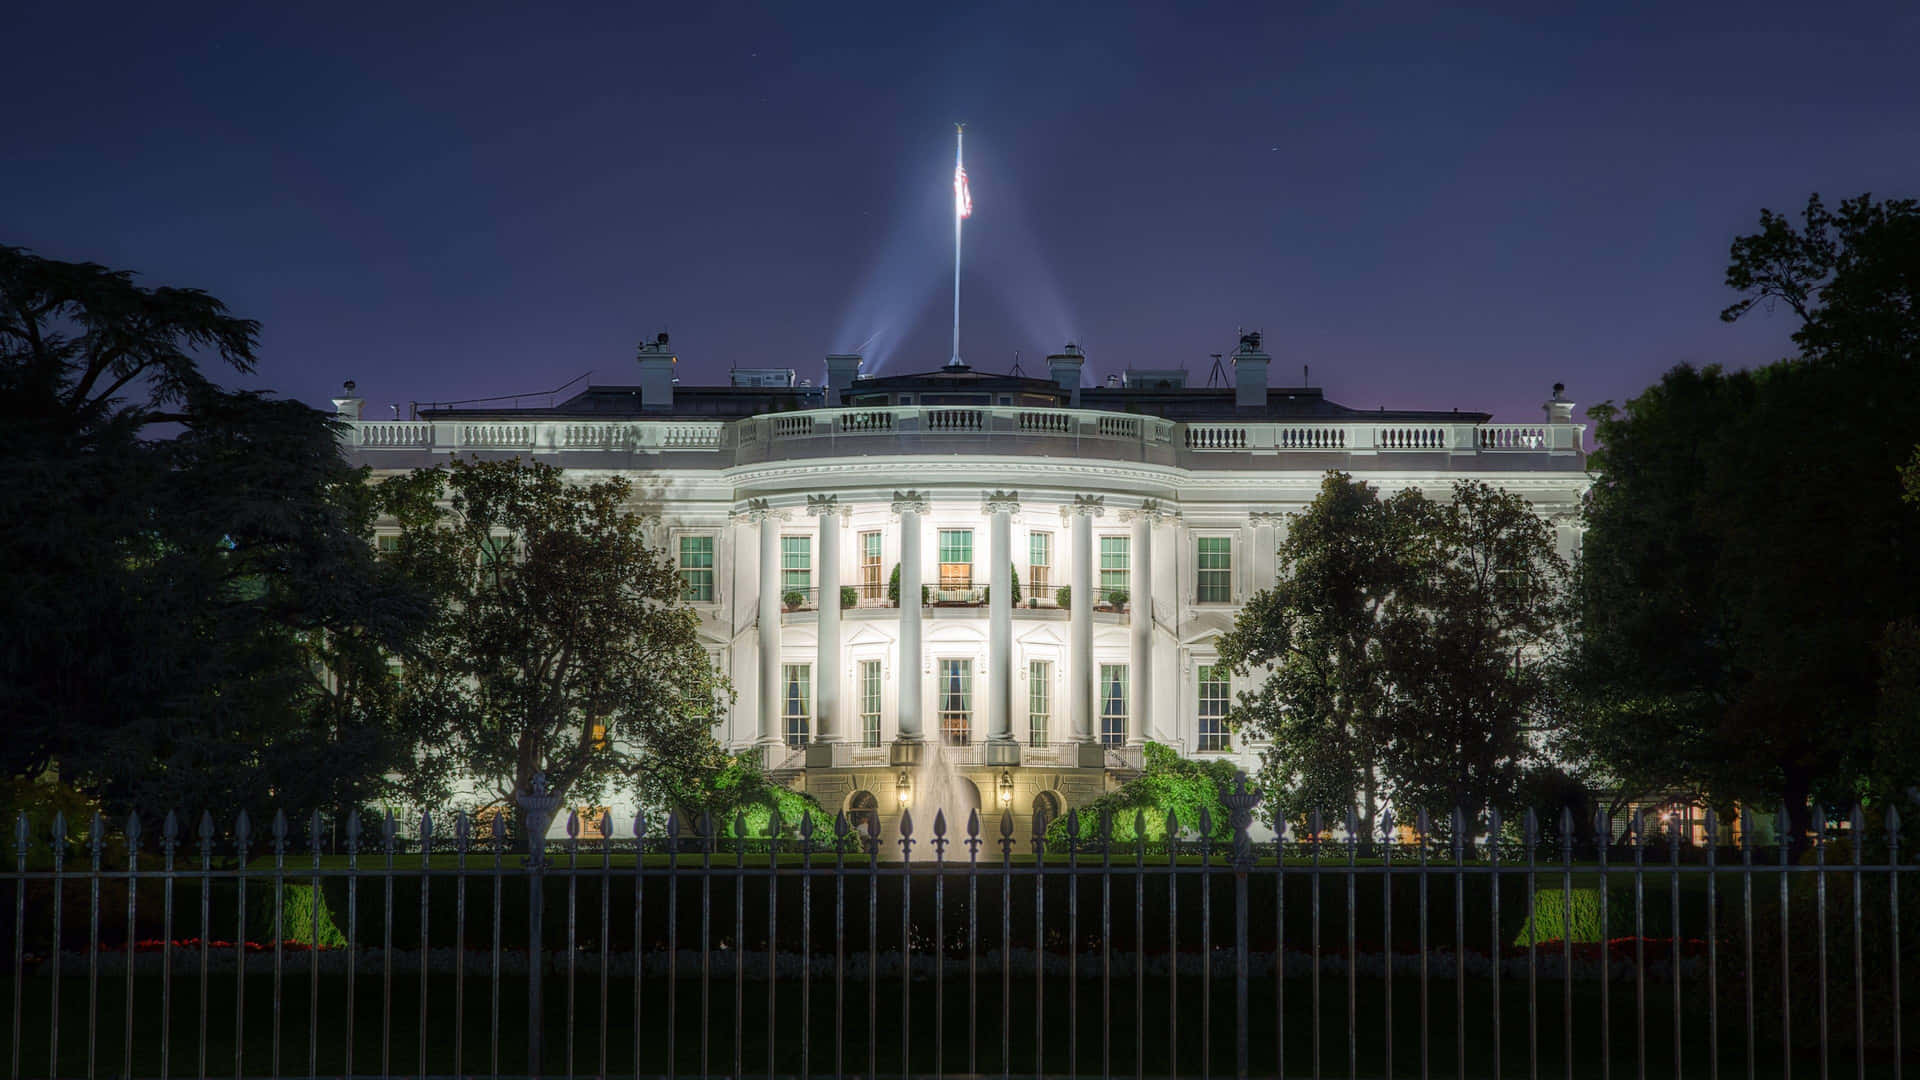 The White House At Night With A Flag